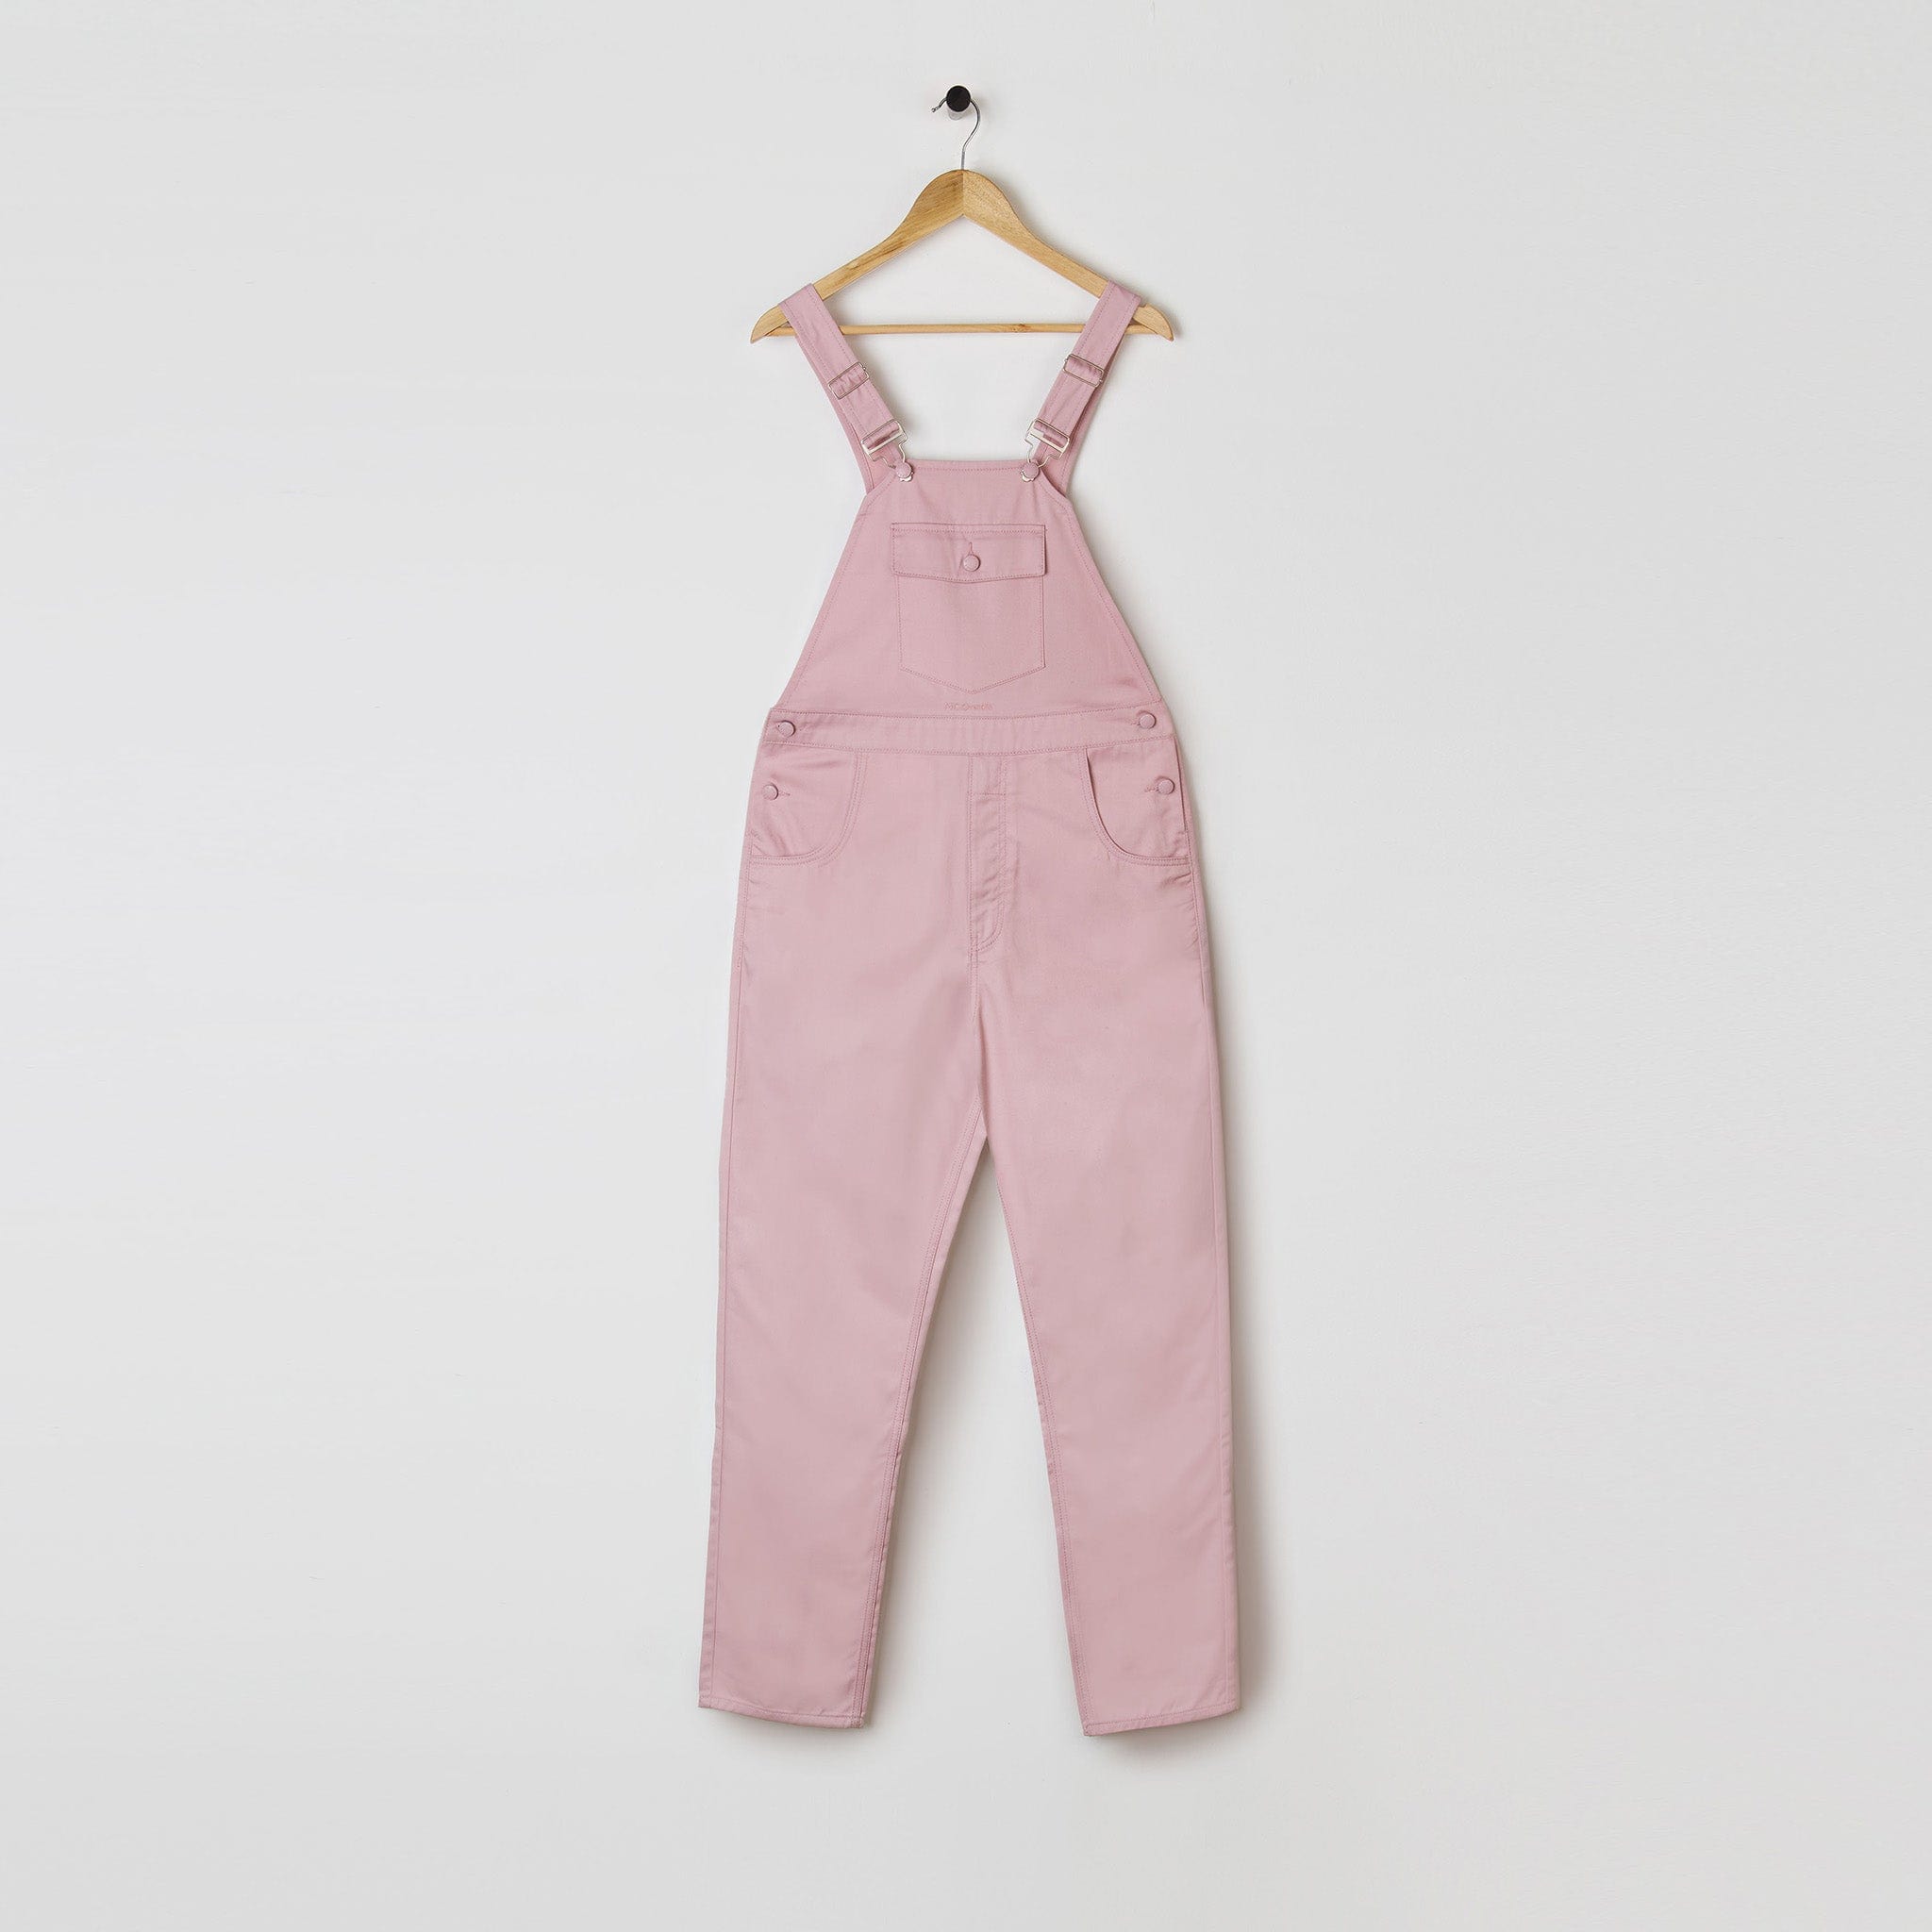 M.C.O&#39;s Pink Polycotton Dungarees in Soho, London.